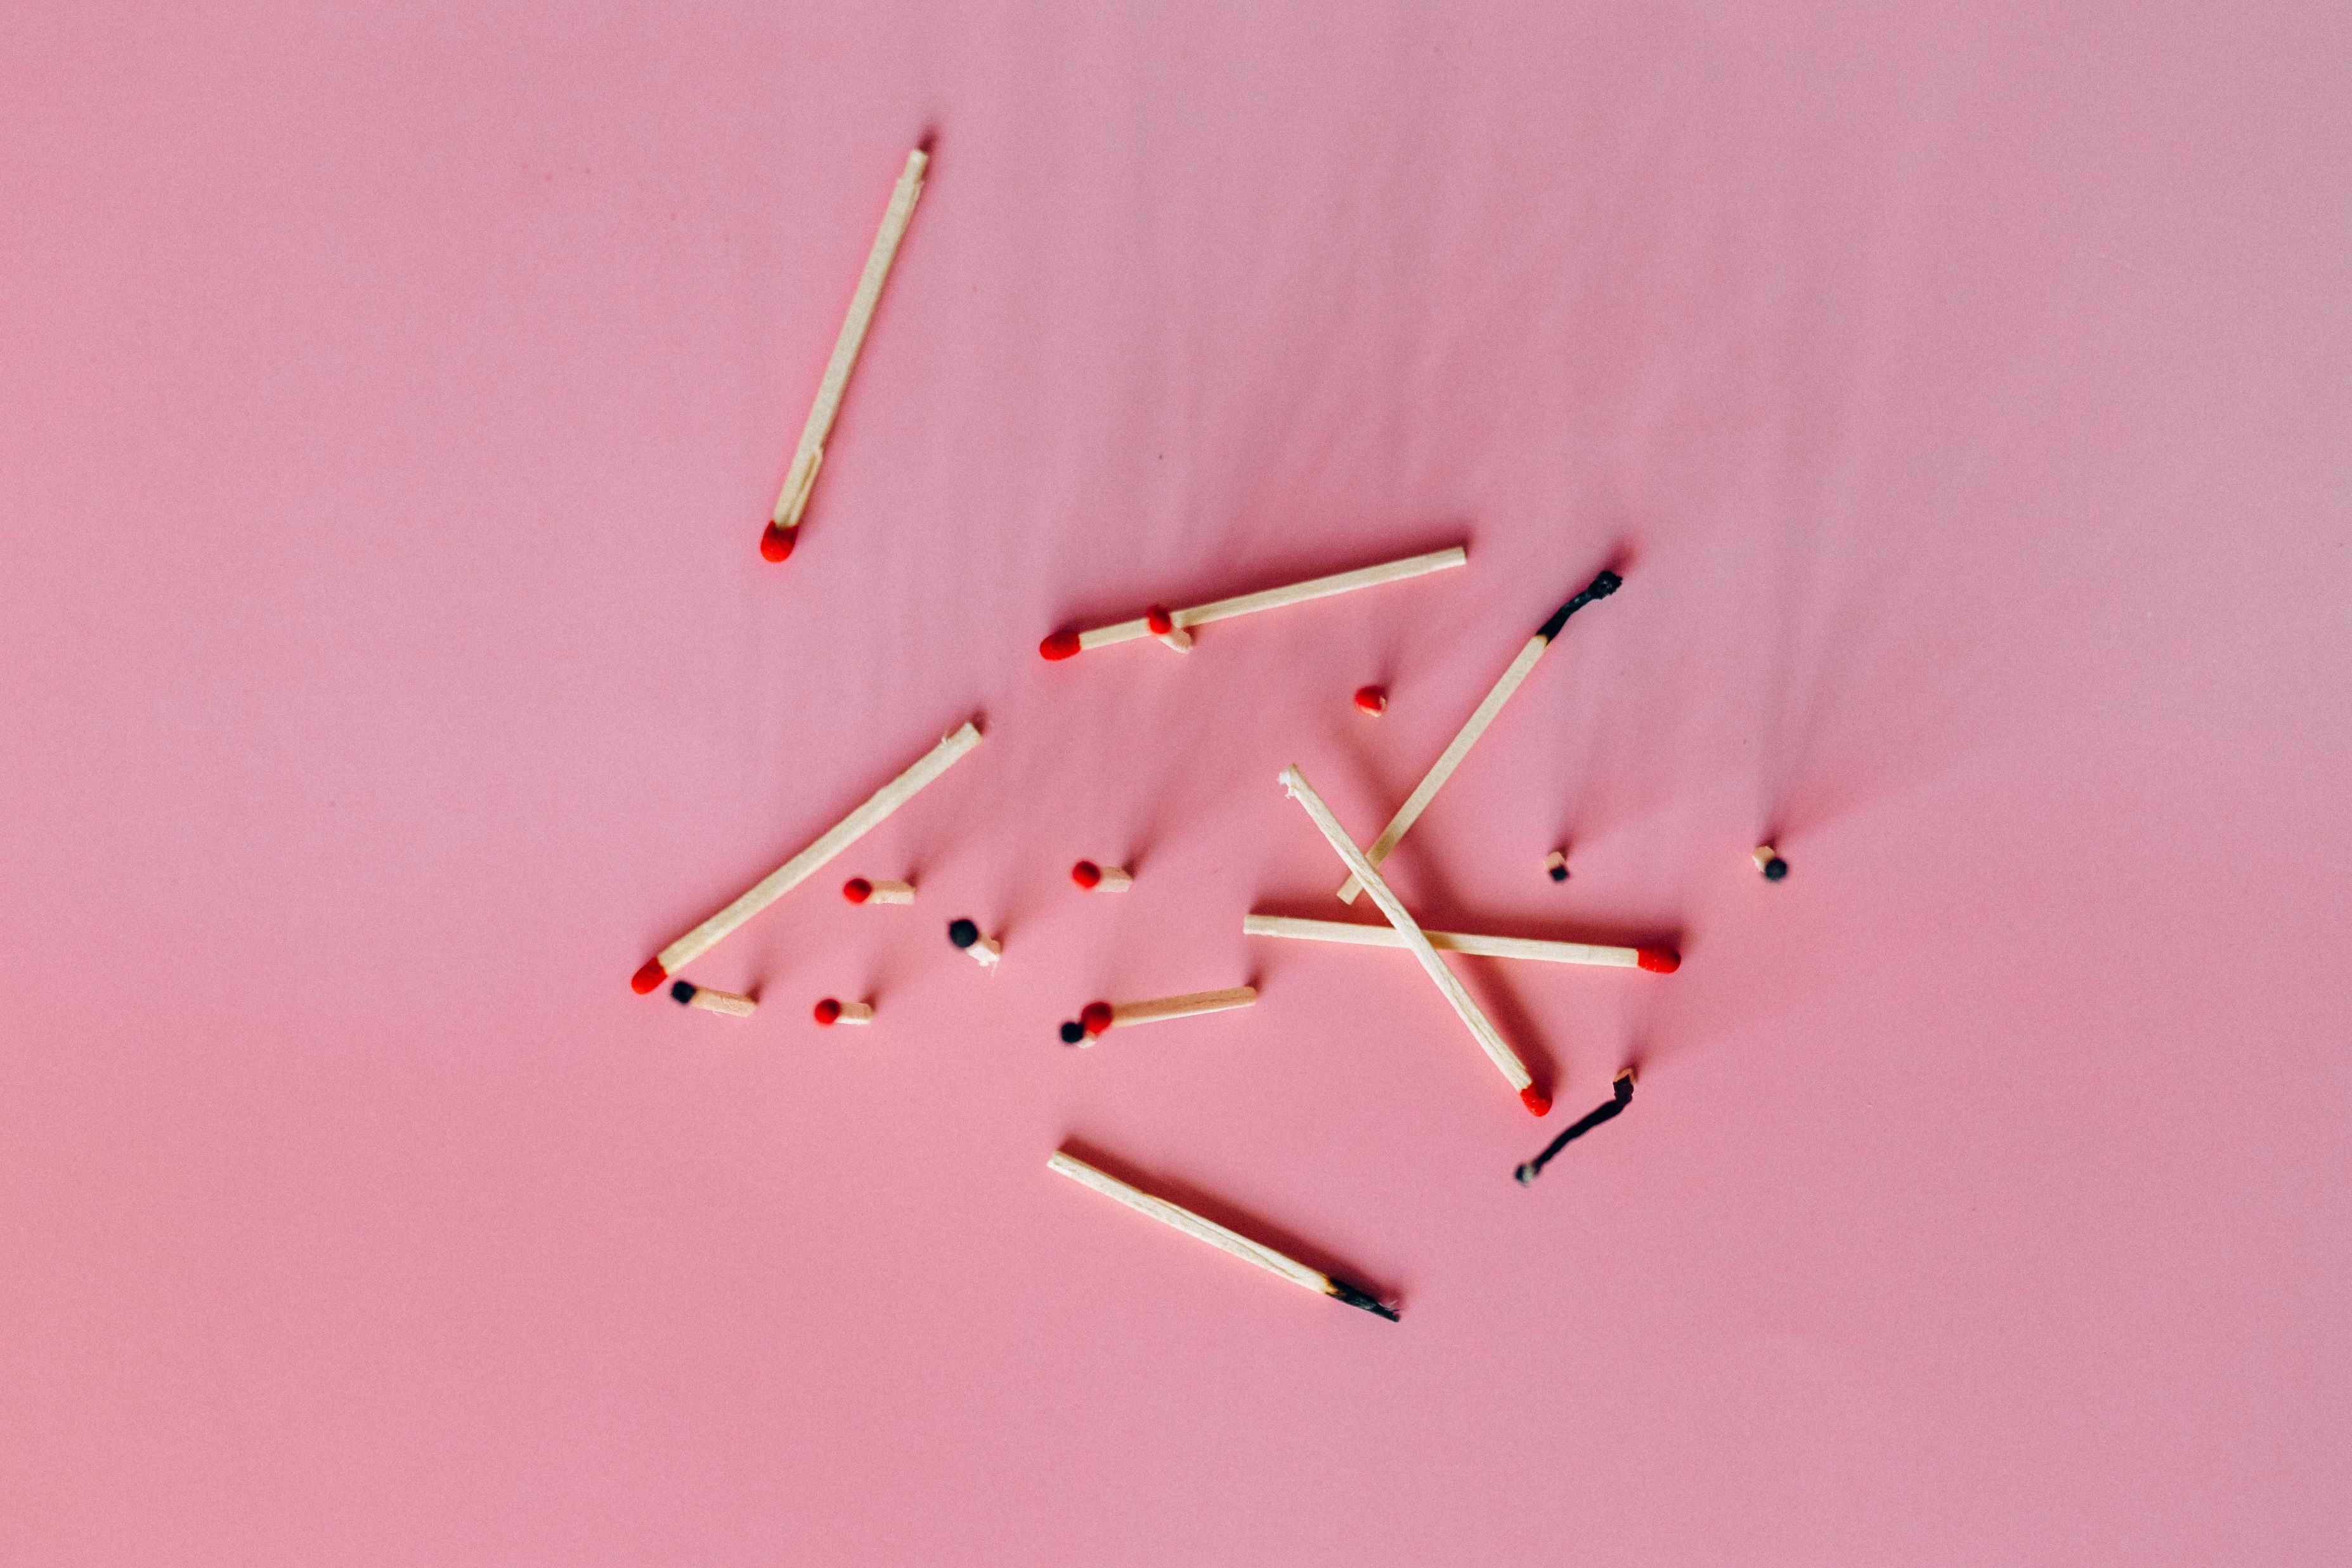 Burnt matches on a pink surface